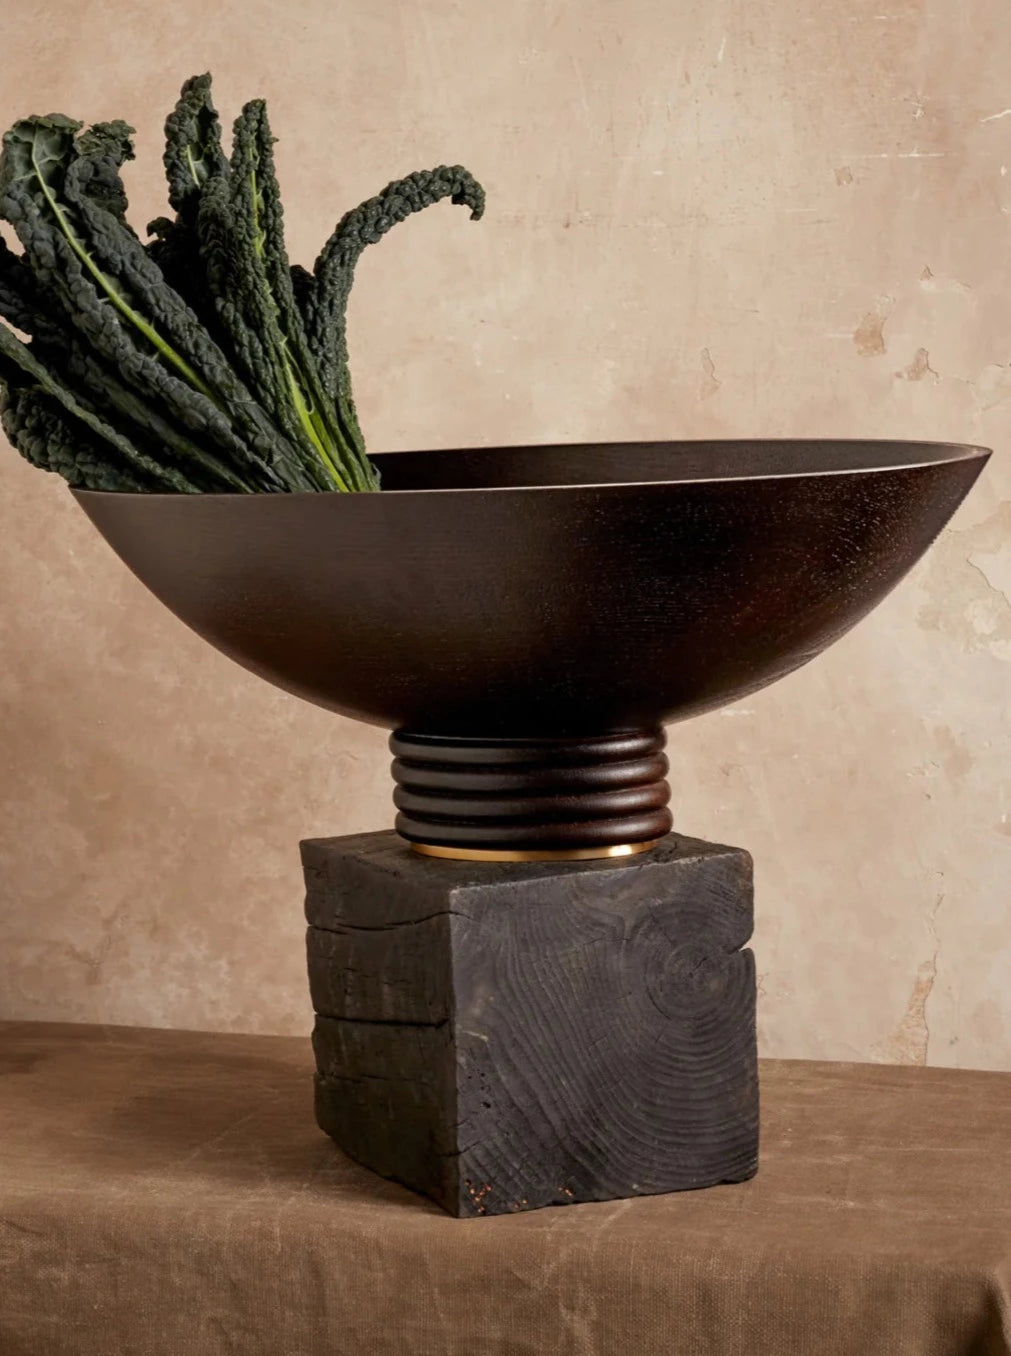 A large Alhambra Oval Bowl by LOBJET resting on a square, textured brass base. The bowl contains tall, leafy green vegetables (kale) extending upward. It's placed against a neutral beige backdrop.